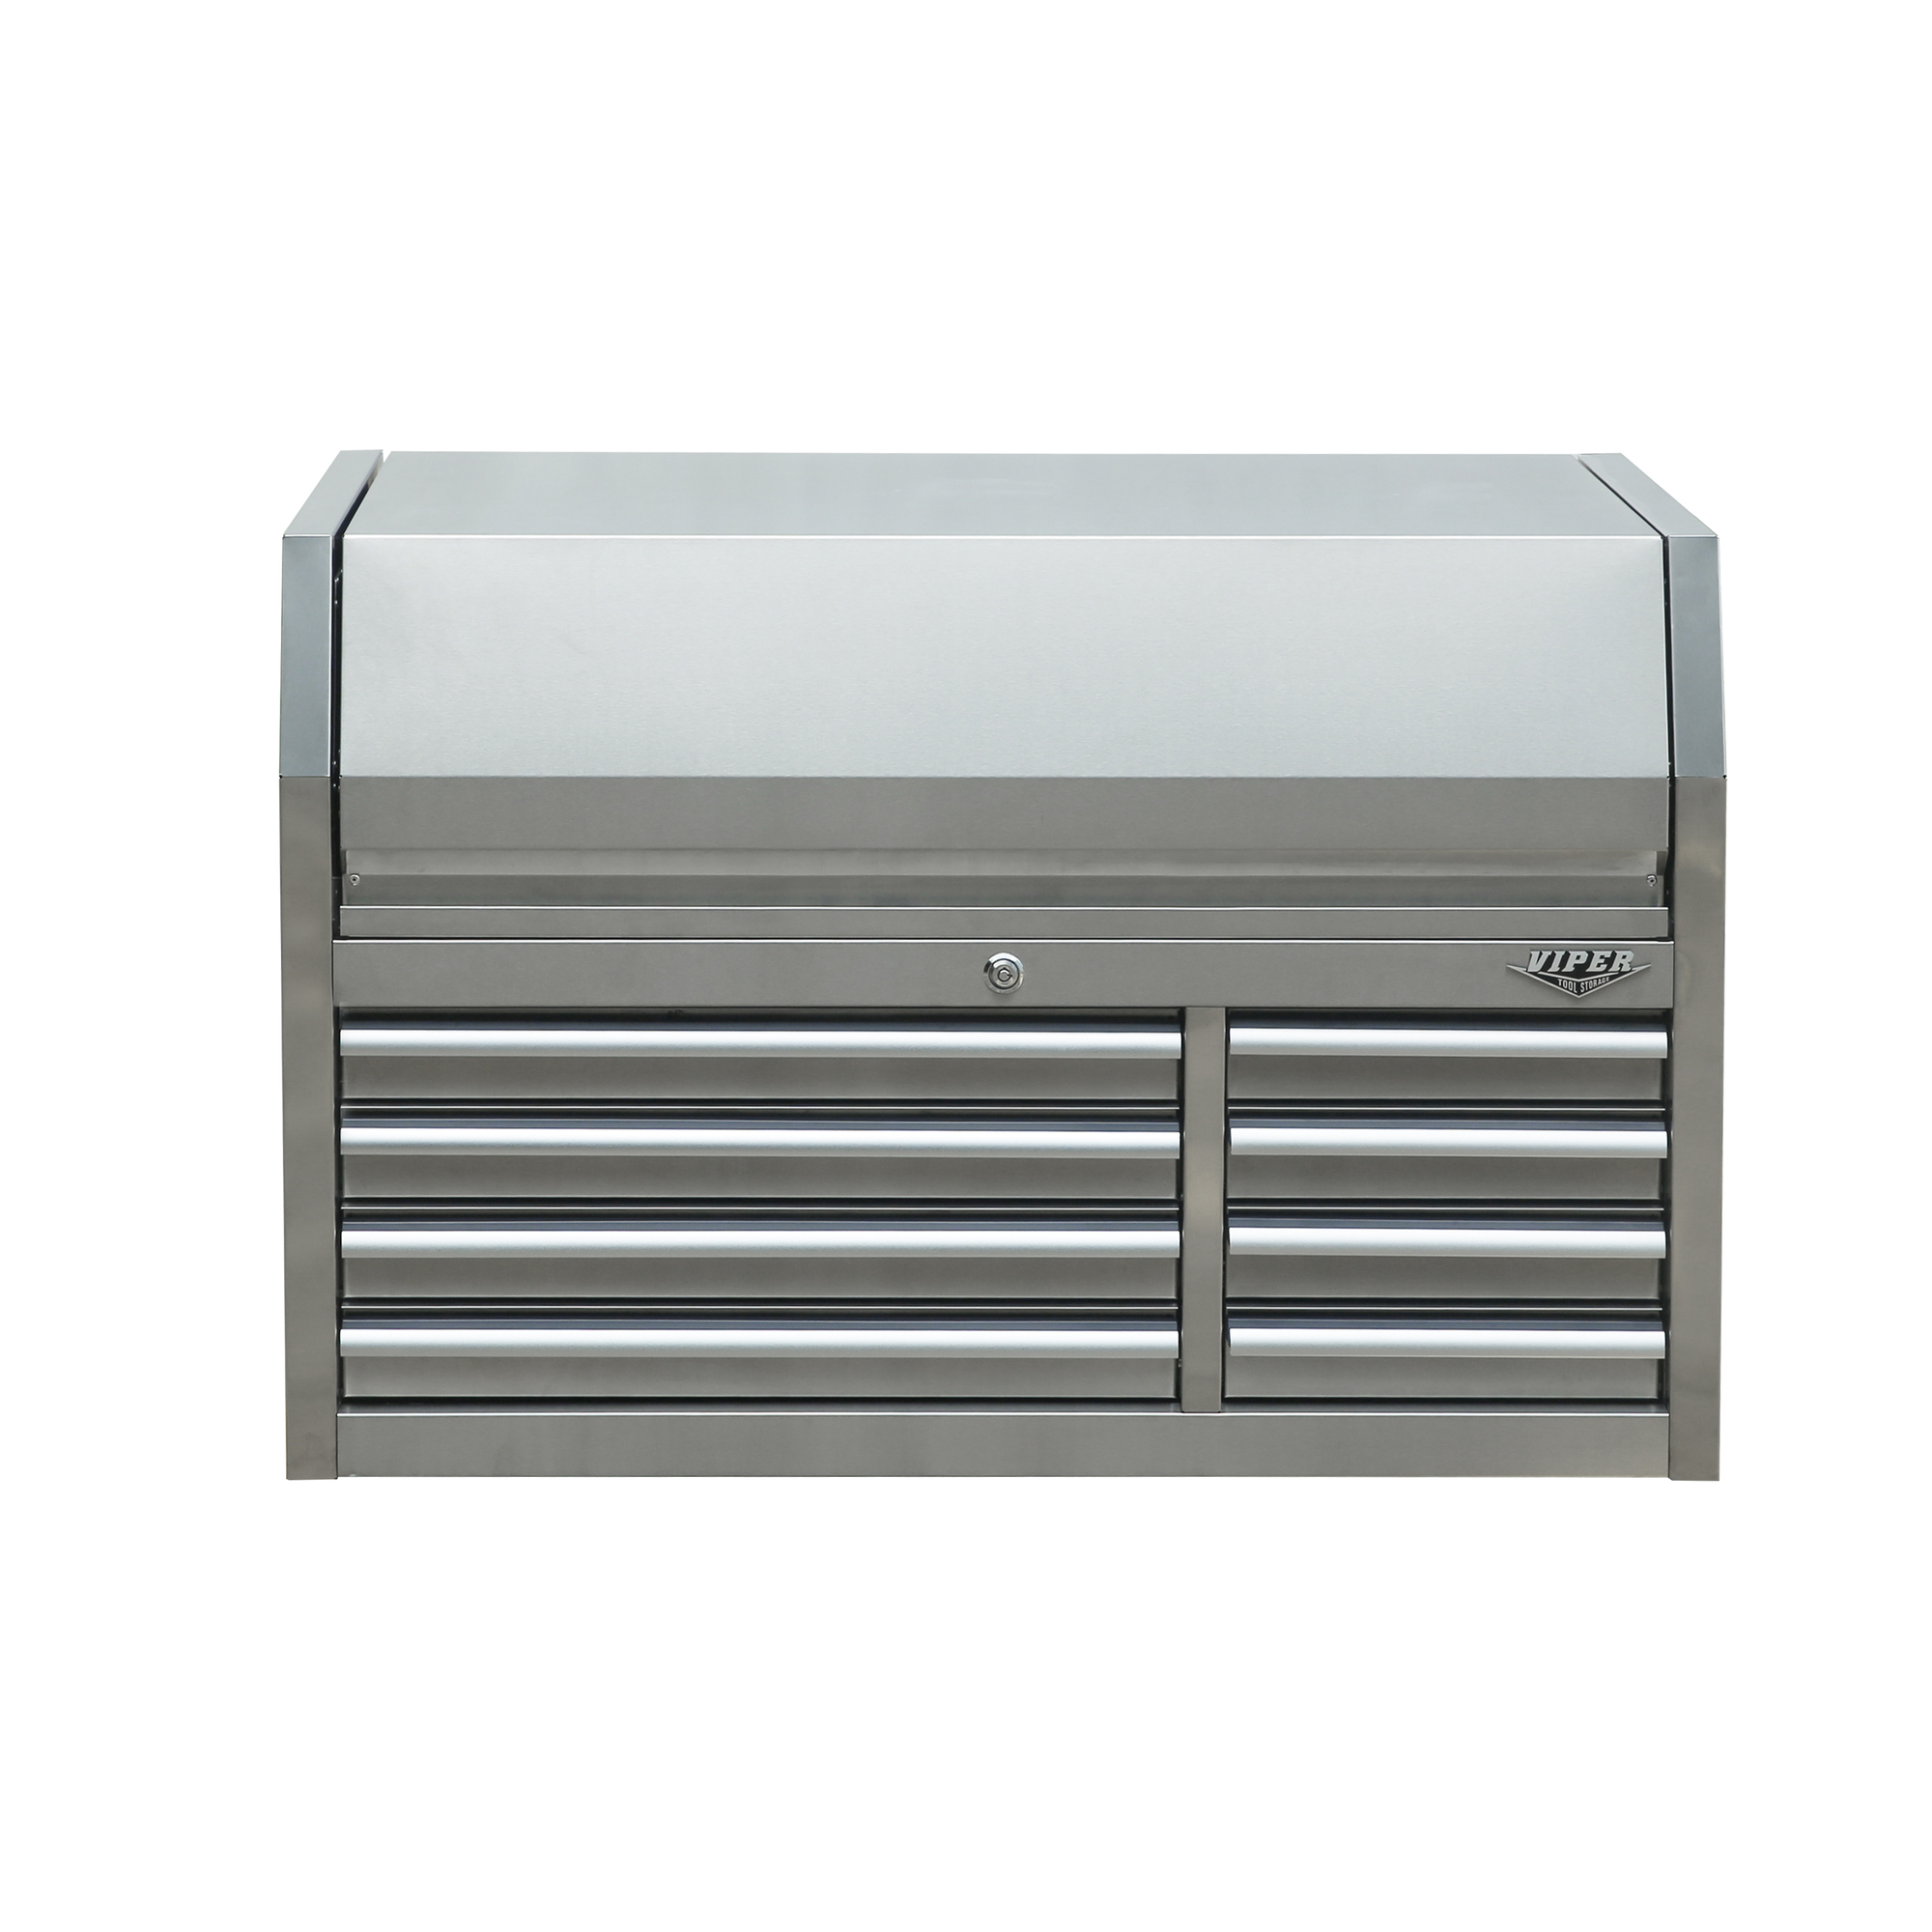 Viper Tool Storage, 8-Drawer Top Chest, Stainless Steel, Width 40.9 in, Height 26.6 in, Color Stainless Steel, Model V4108SSC